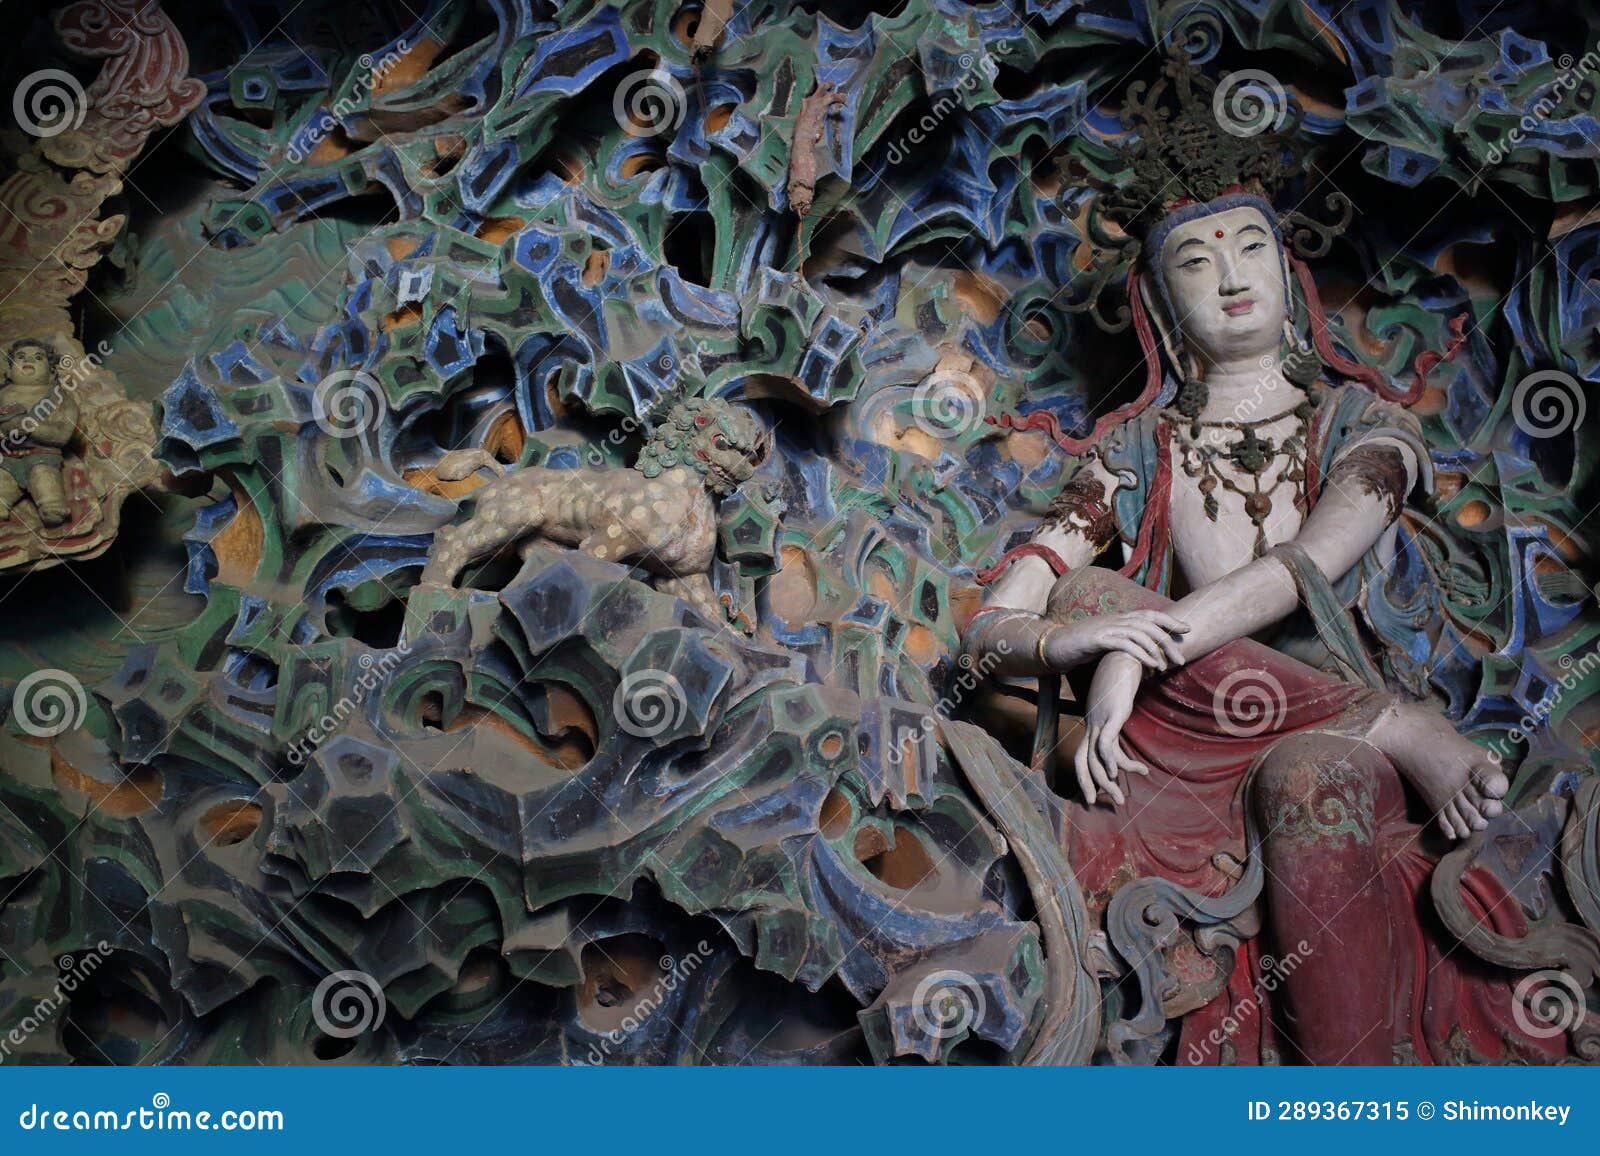 the statue of guanyin bodhisattva in a temple in shijiazhuang, hebei province, china.